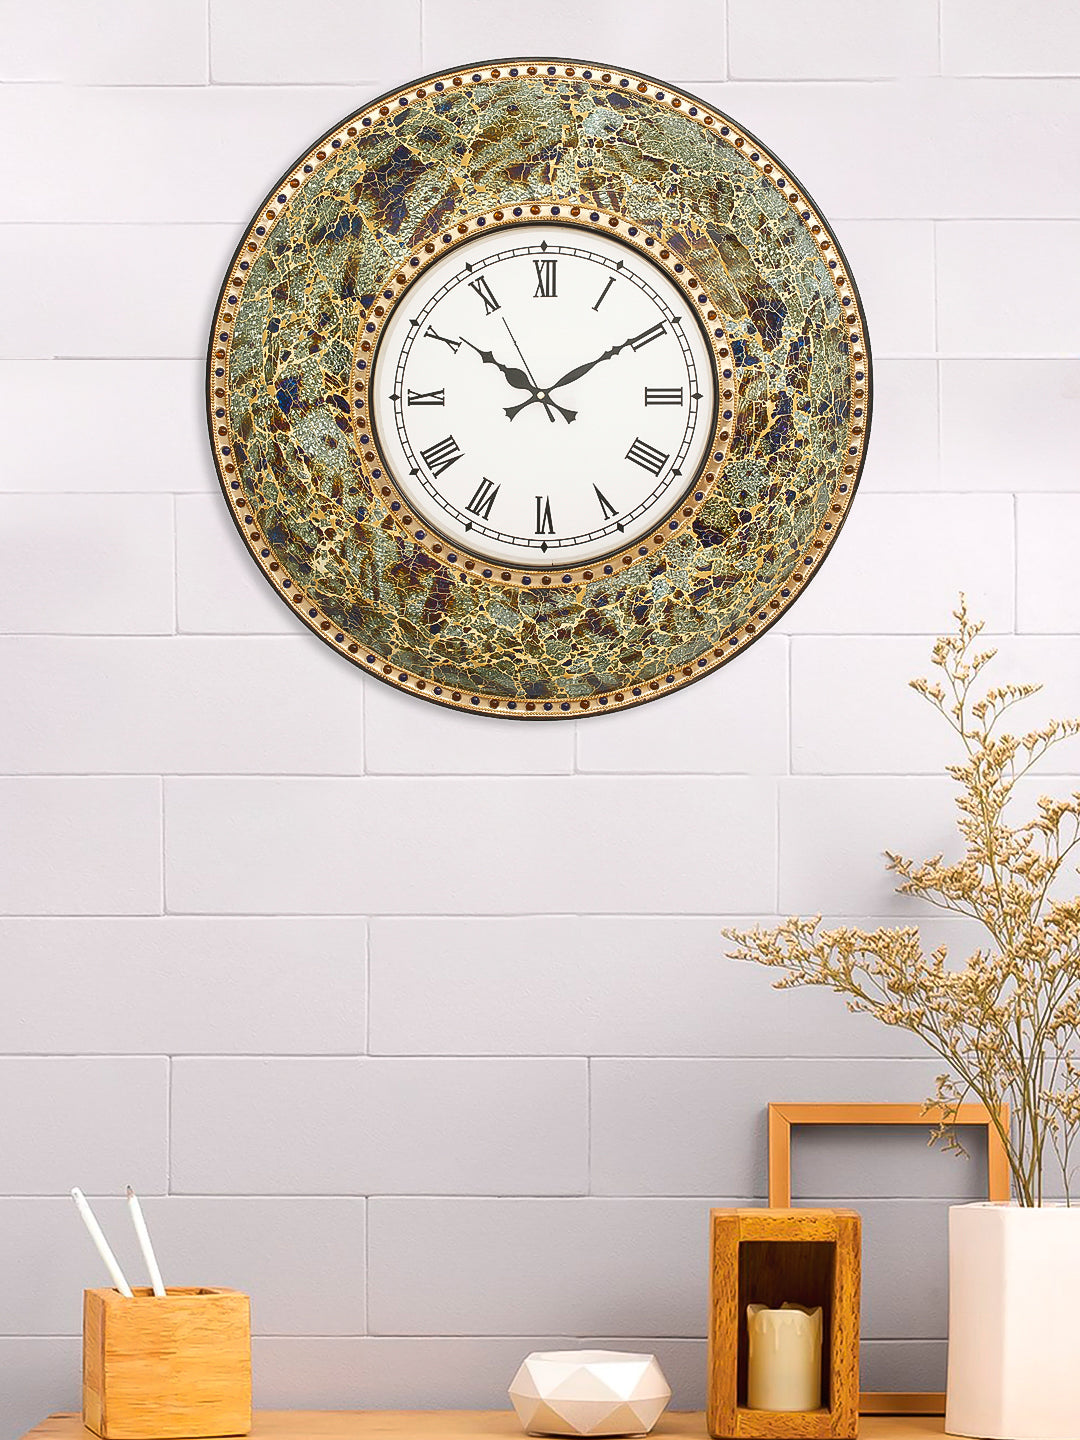 Multicolor Mosaic Glass & Wood Round Handcrafted Analog Ethnic Luxury Roman Numeral Wall Clock 1